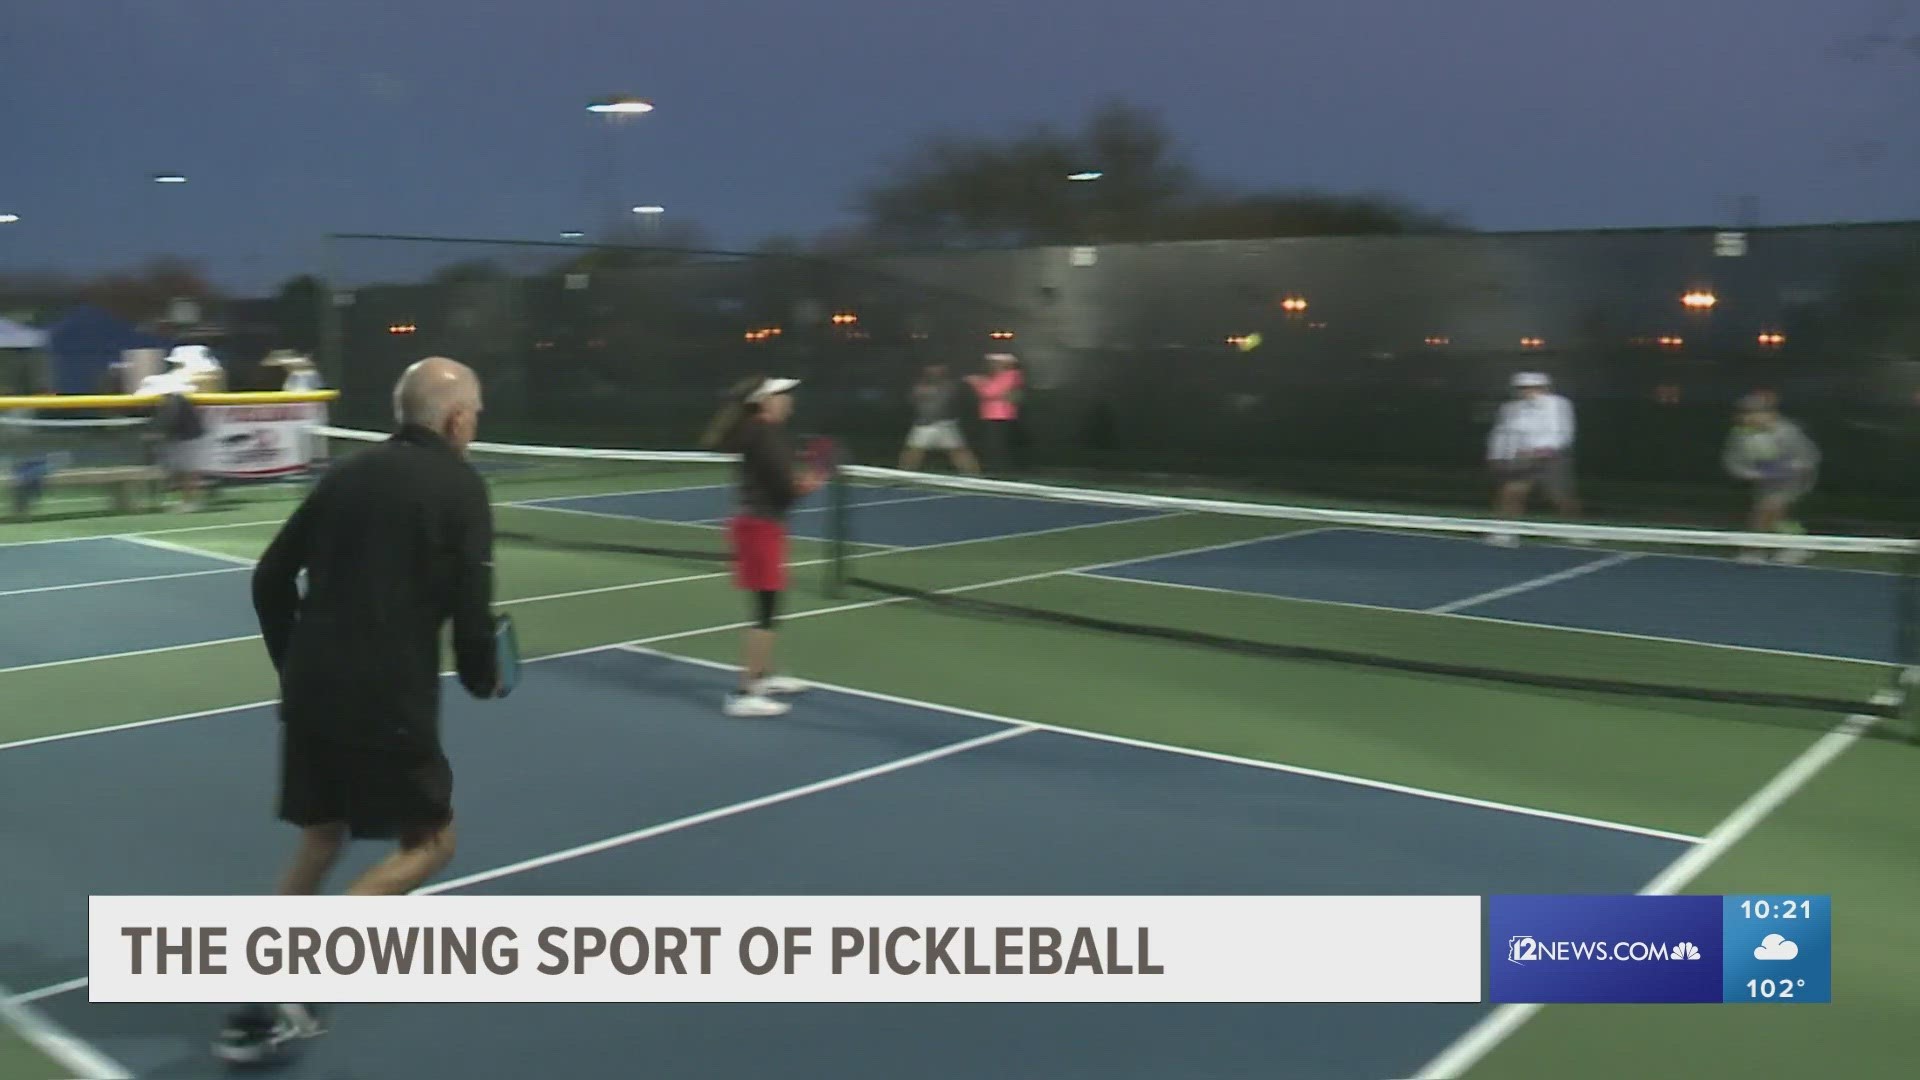 Arizona is also home to the first team-based pickleball league. It's grown from six to 373 teams in just four years.